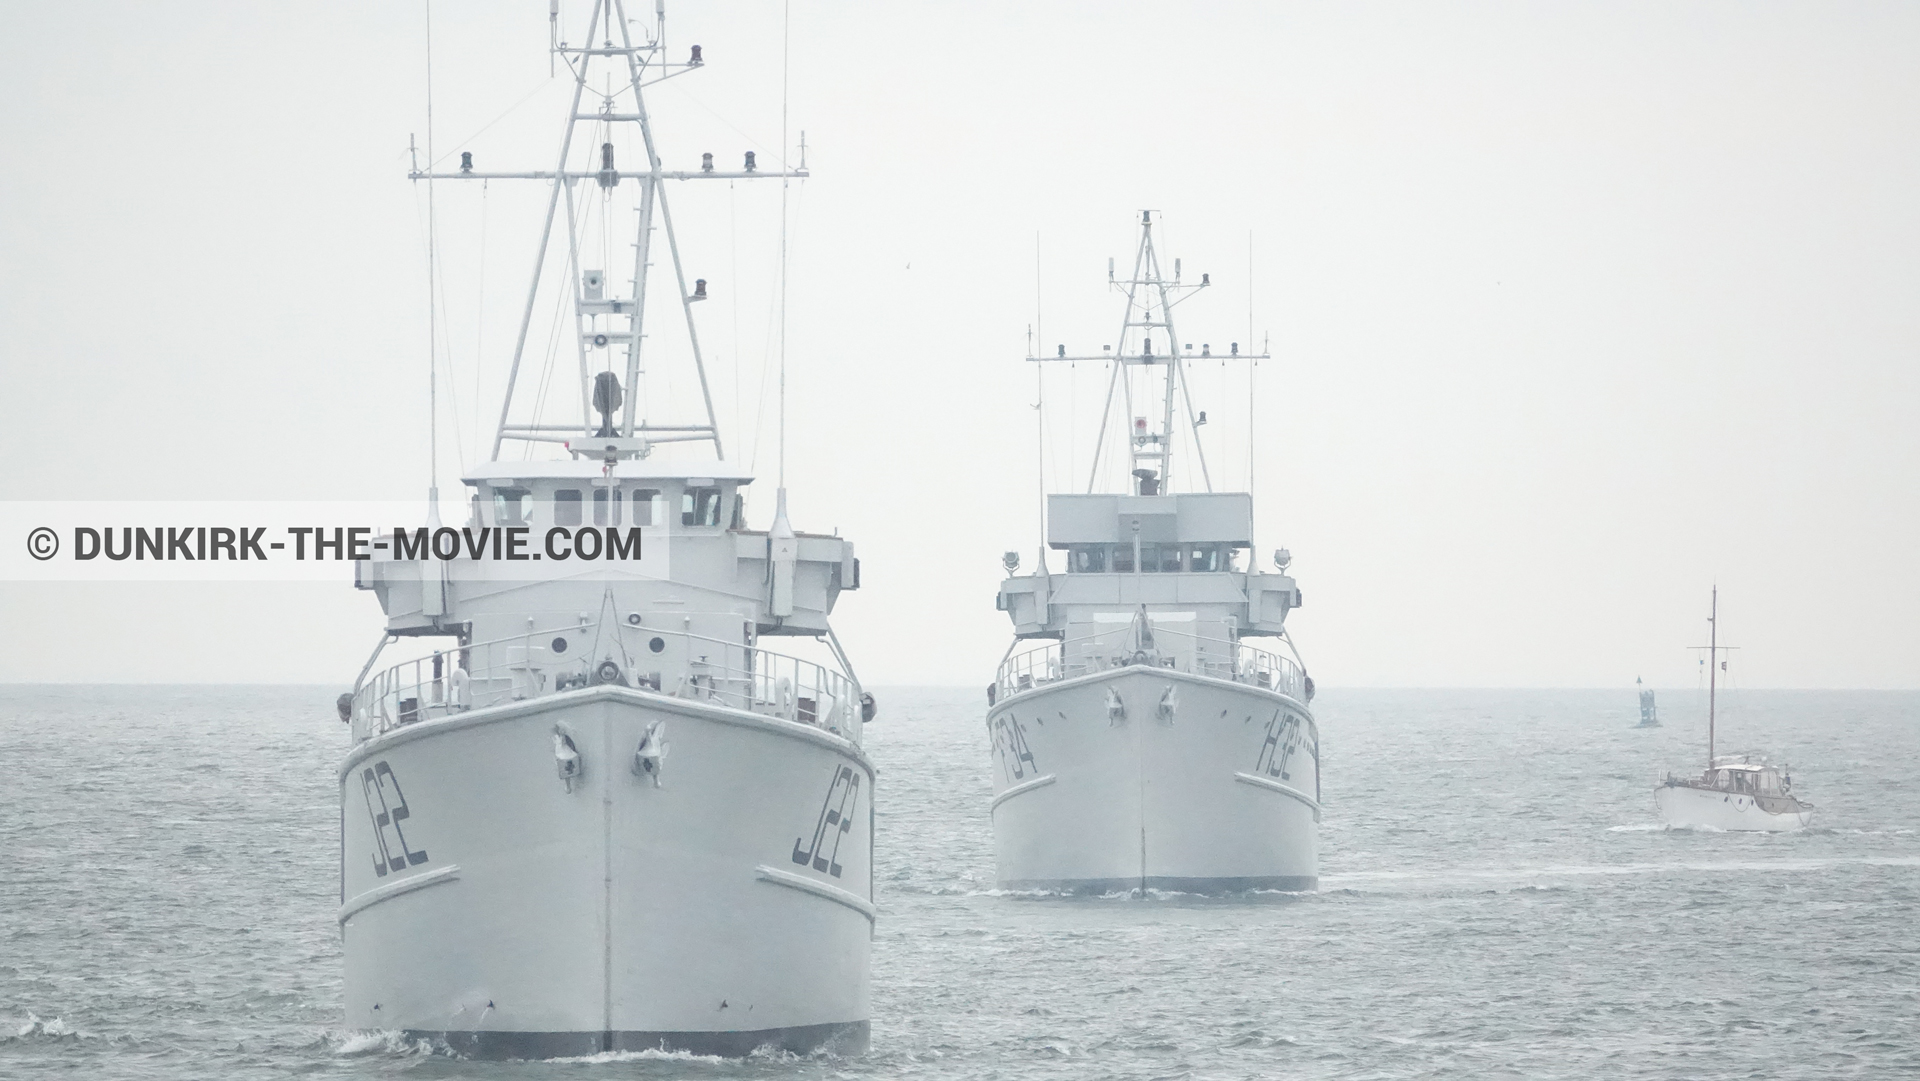 Picture with boat, F34 - Hr.Ms. Sittard, H32 - Hr.Ms. Sittard, J22 -Hr.Ms. Naaldwijk, calm sea,  from behind the scene of the Dunkirk movie by Nolan